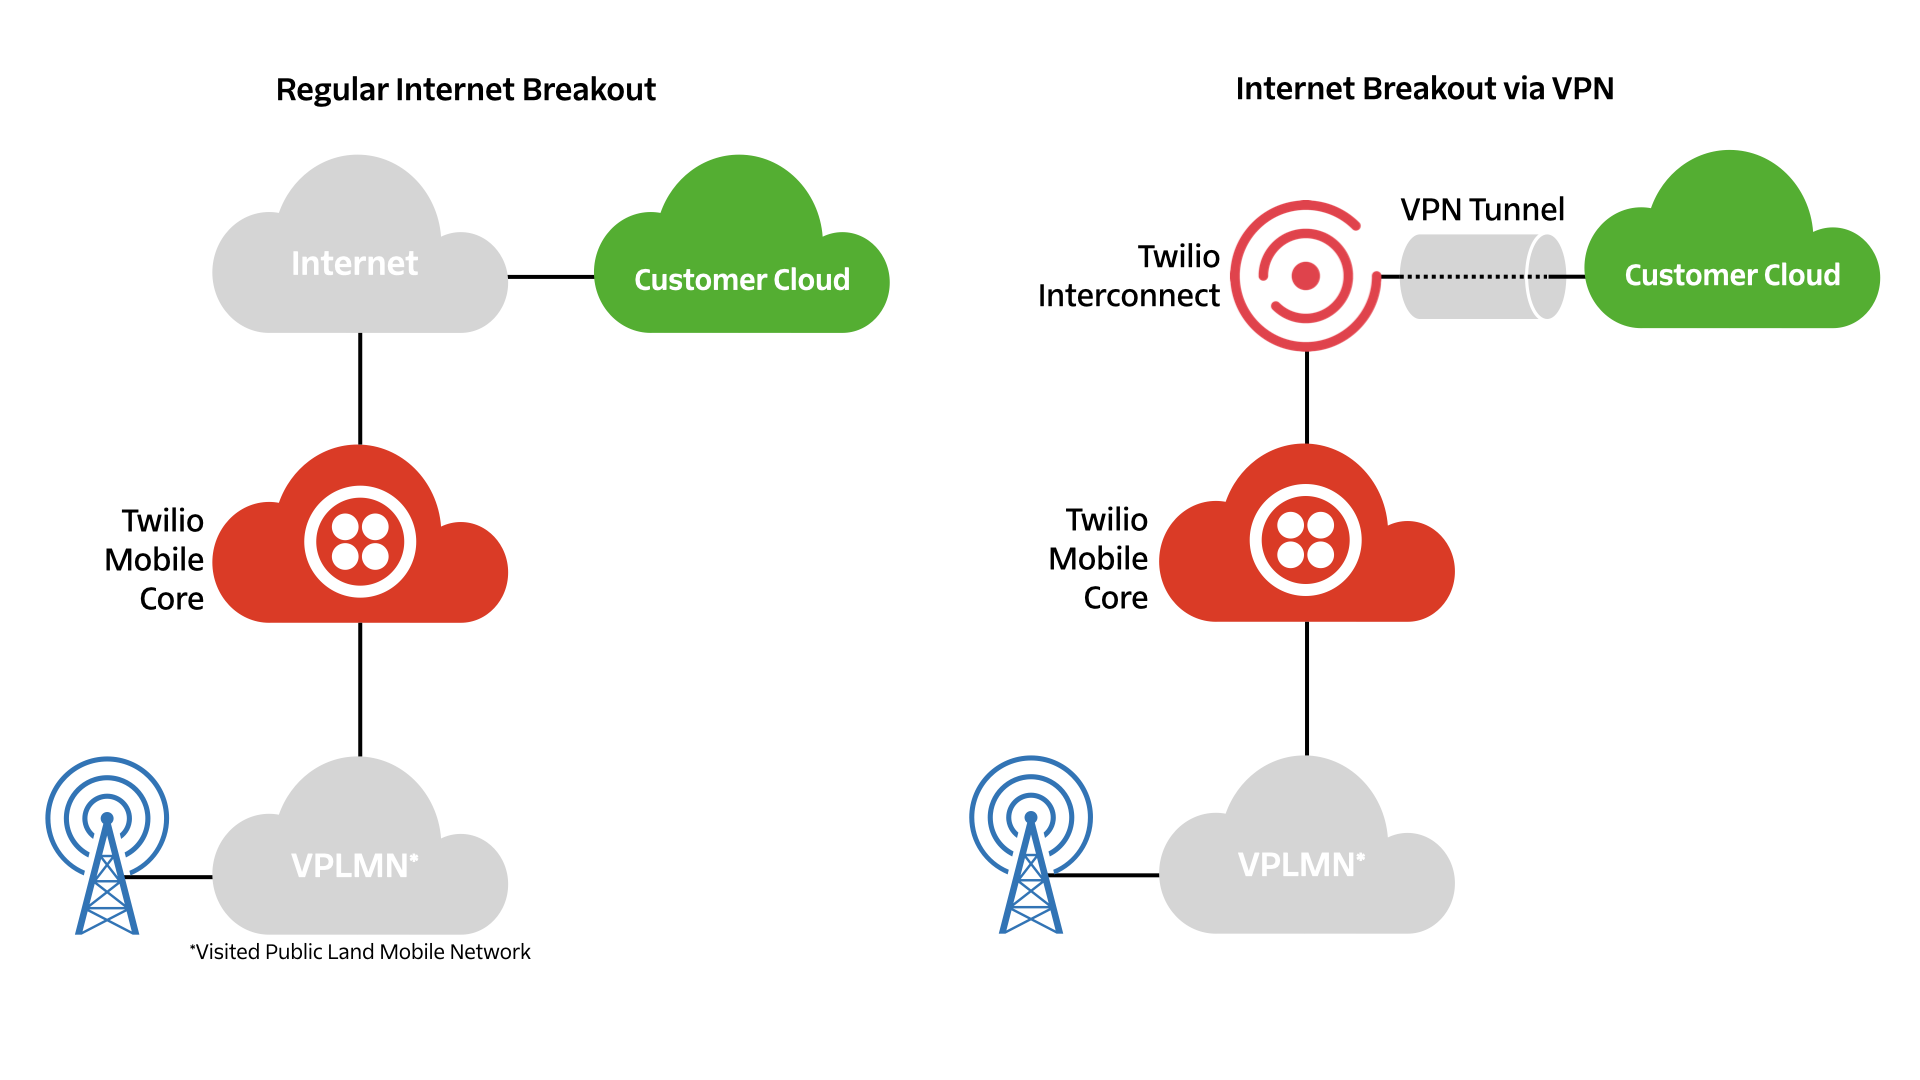 How connections are made via the Internet versus a VPN.